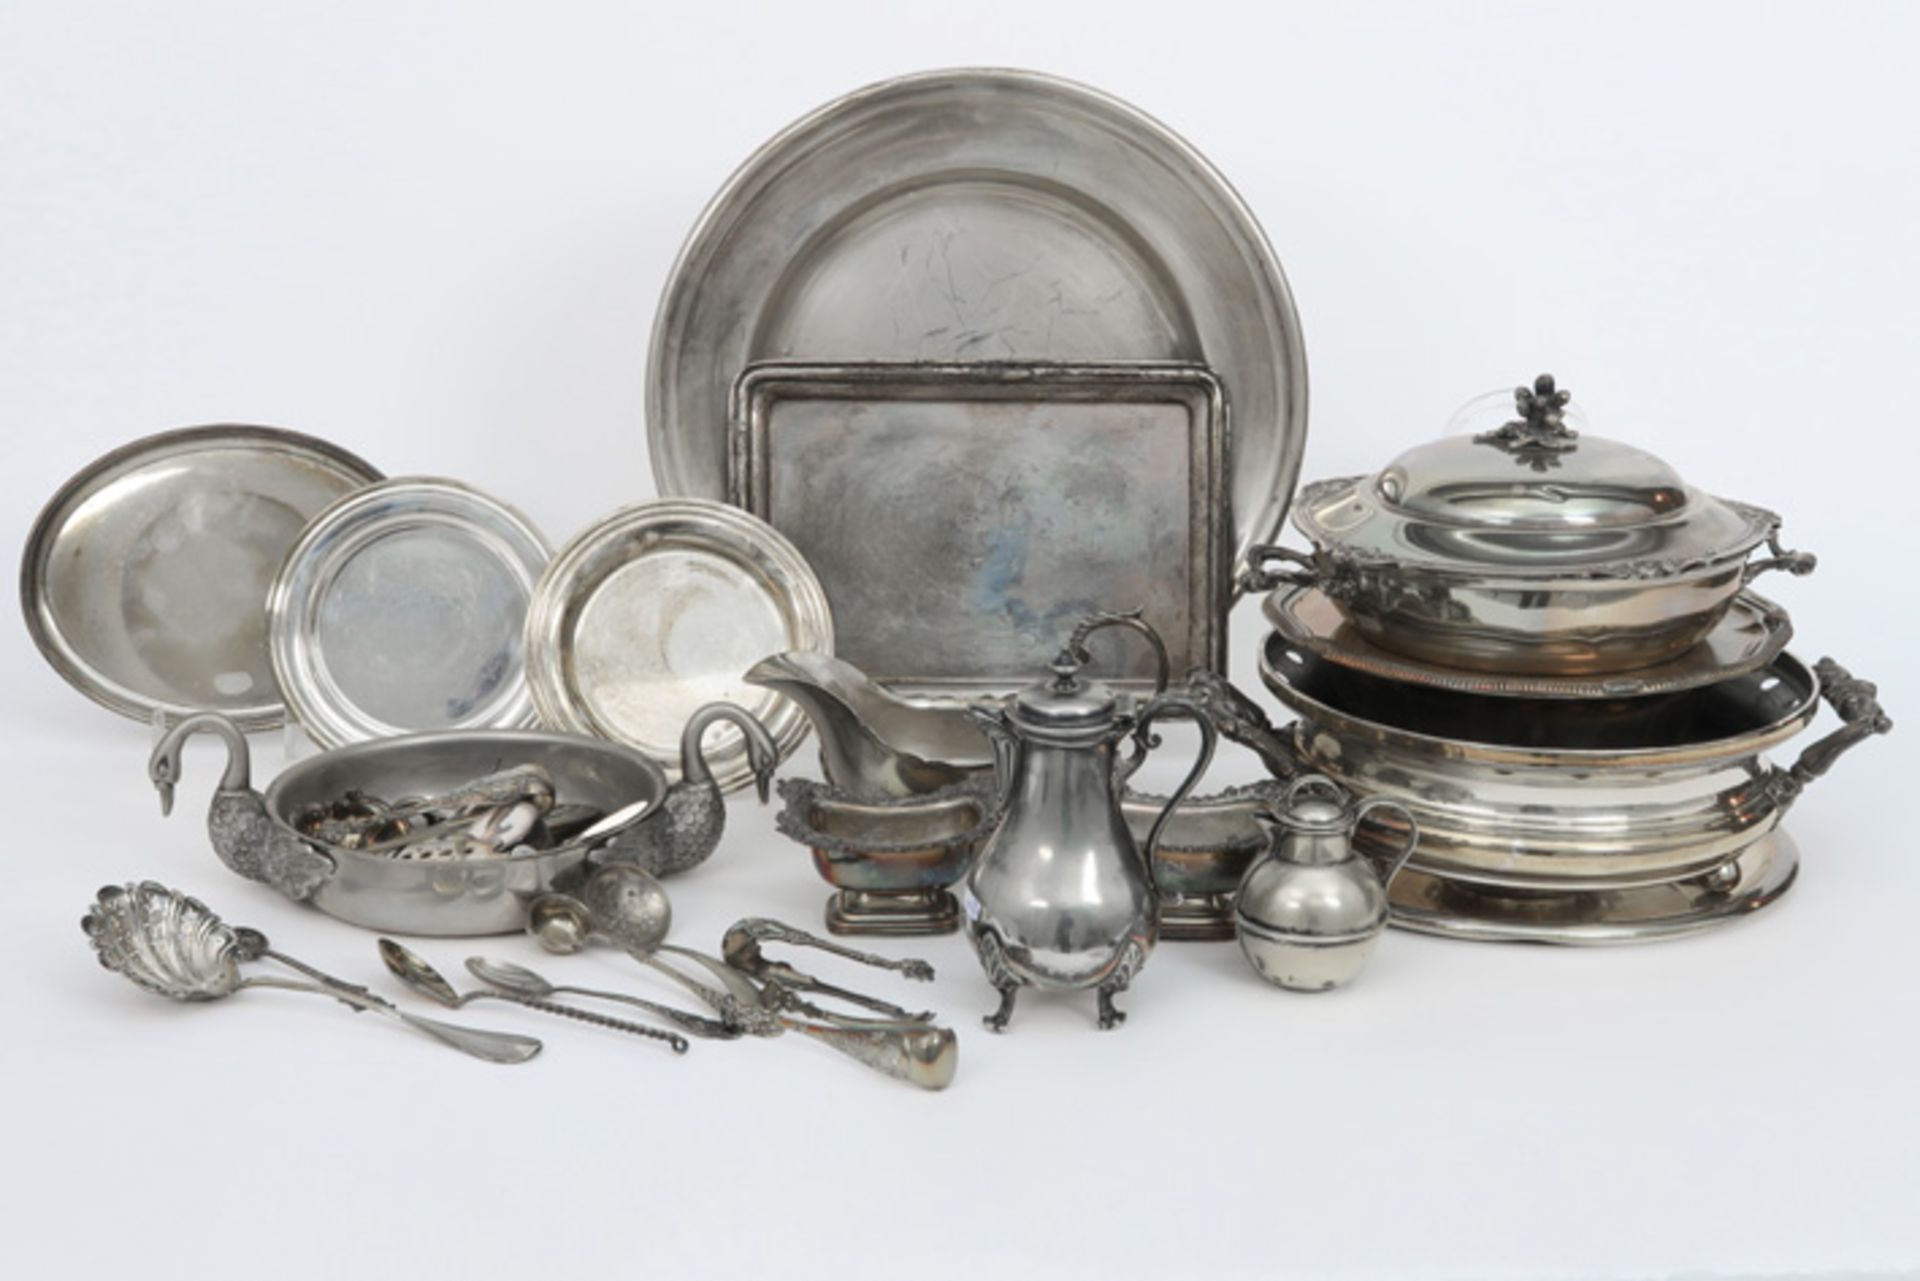 several silverplated items with serving plates, sauce boats, ...||Lot verzilverd metaal met oa